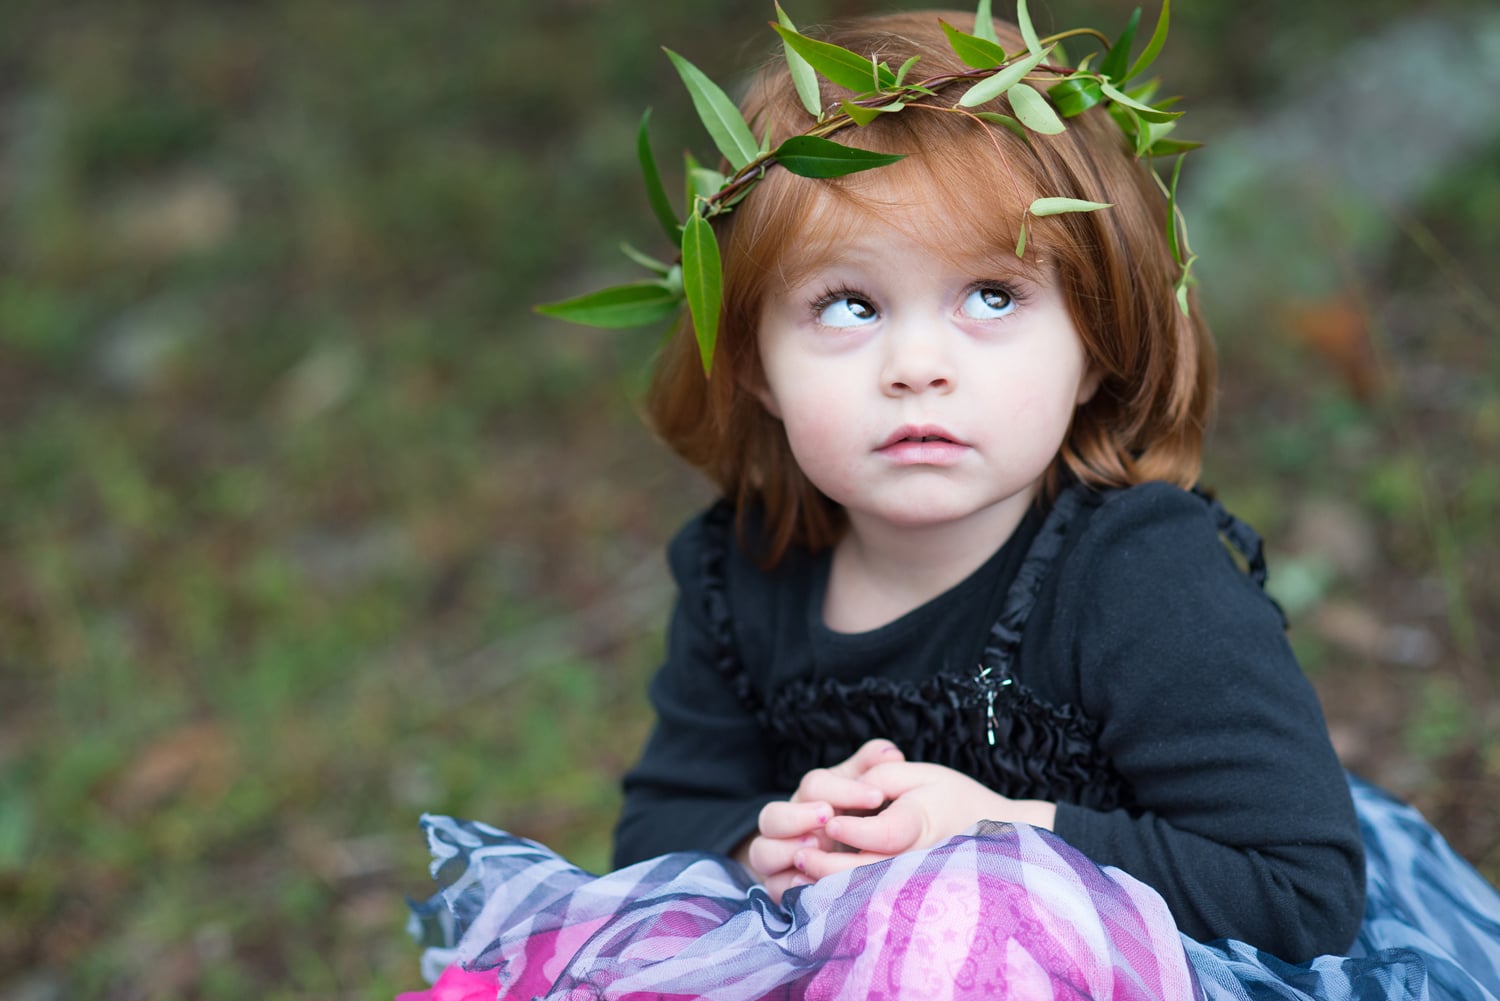 Little girl with grass halo wreath